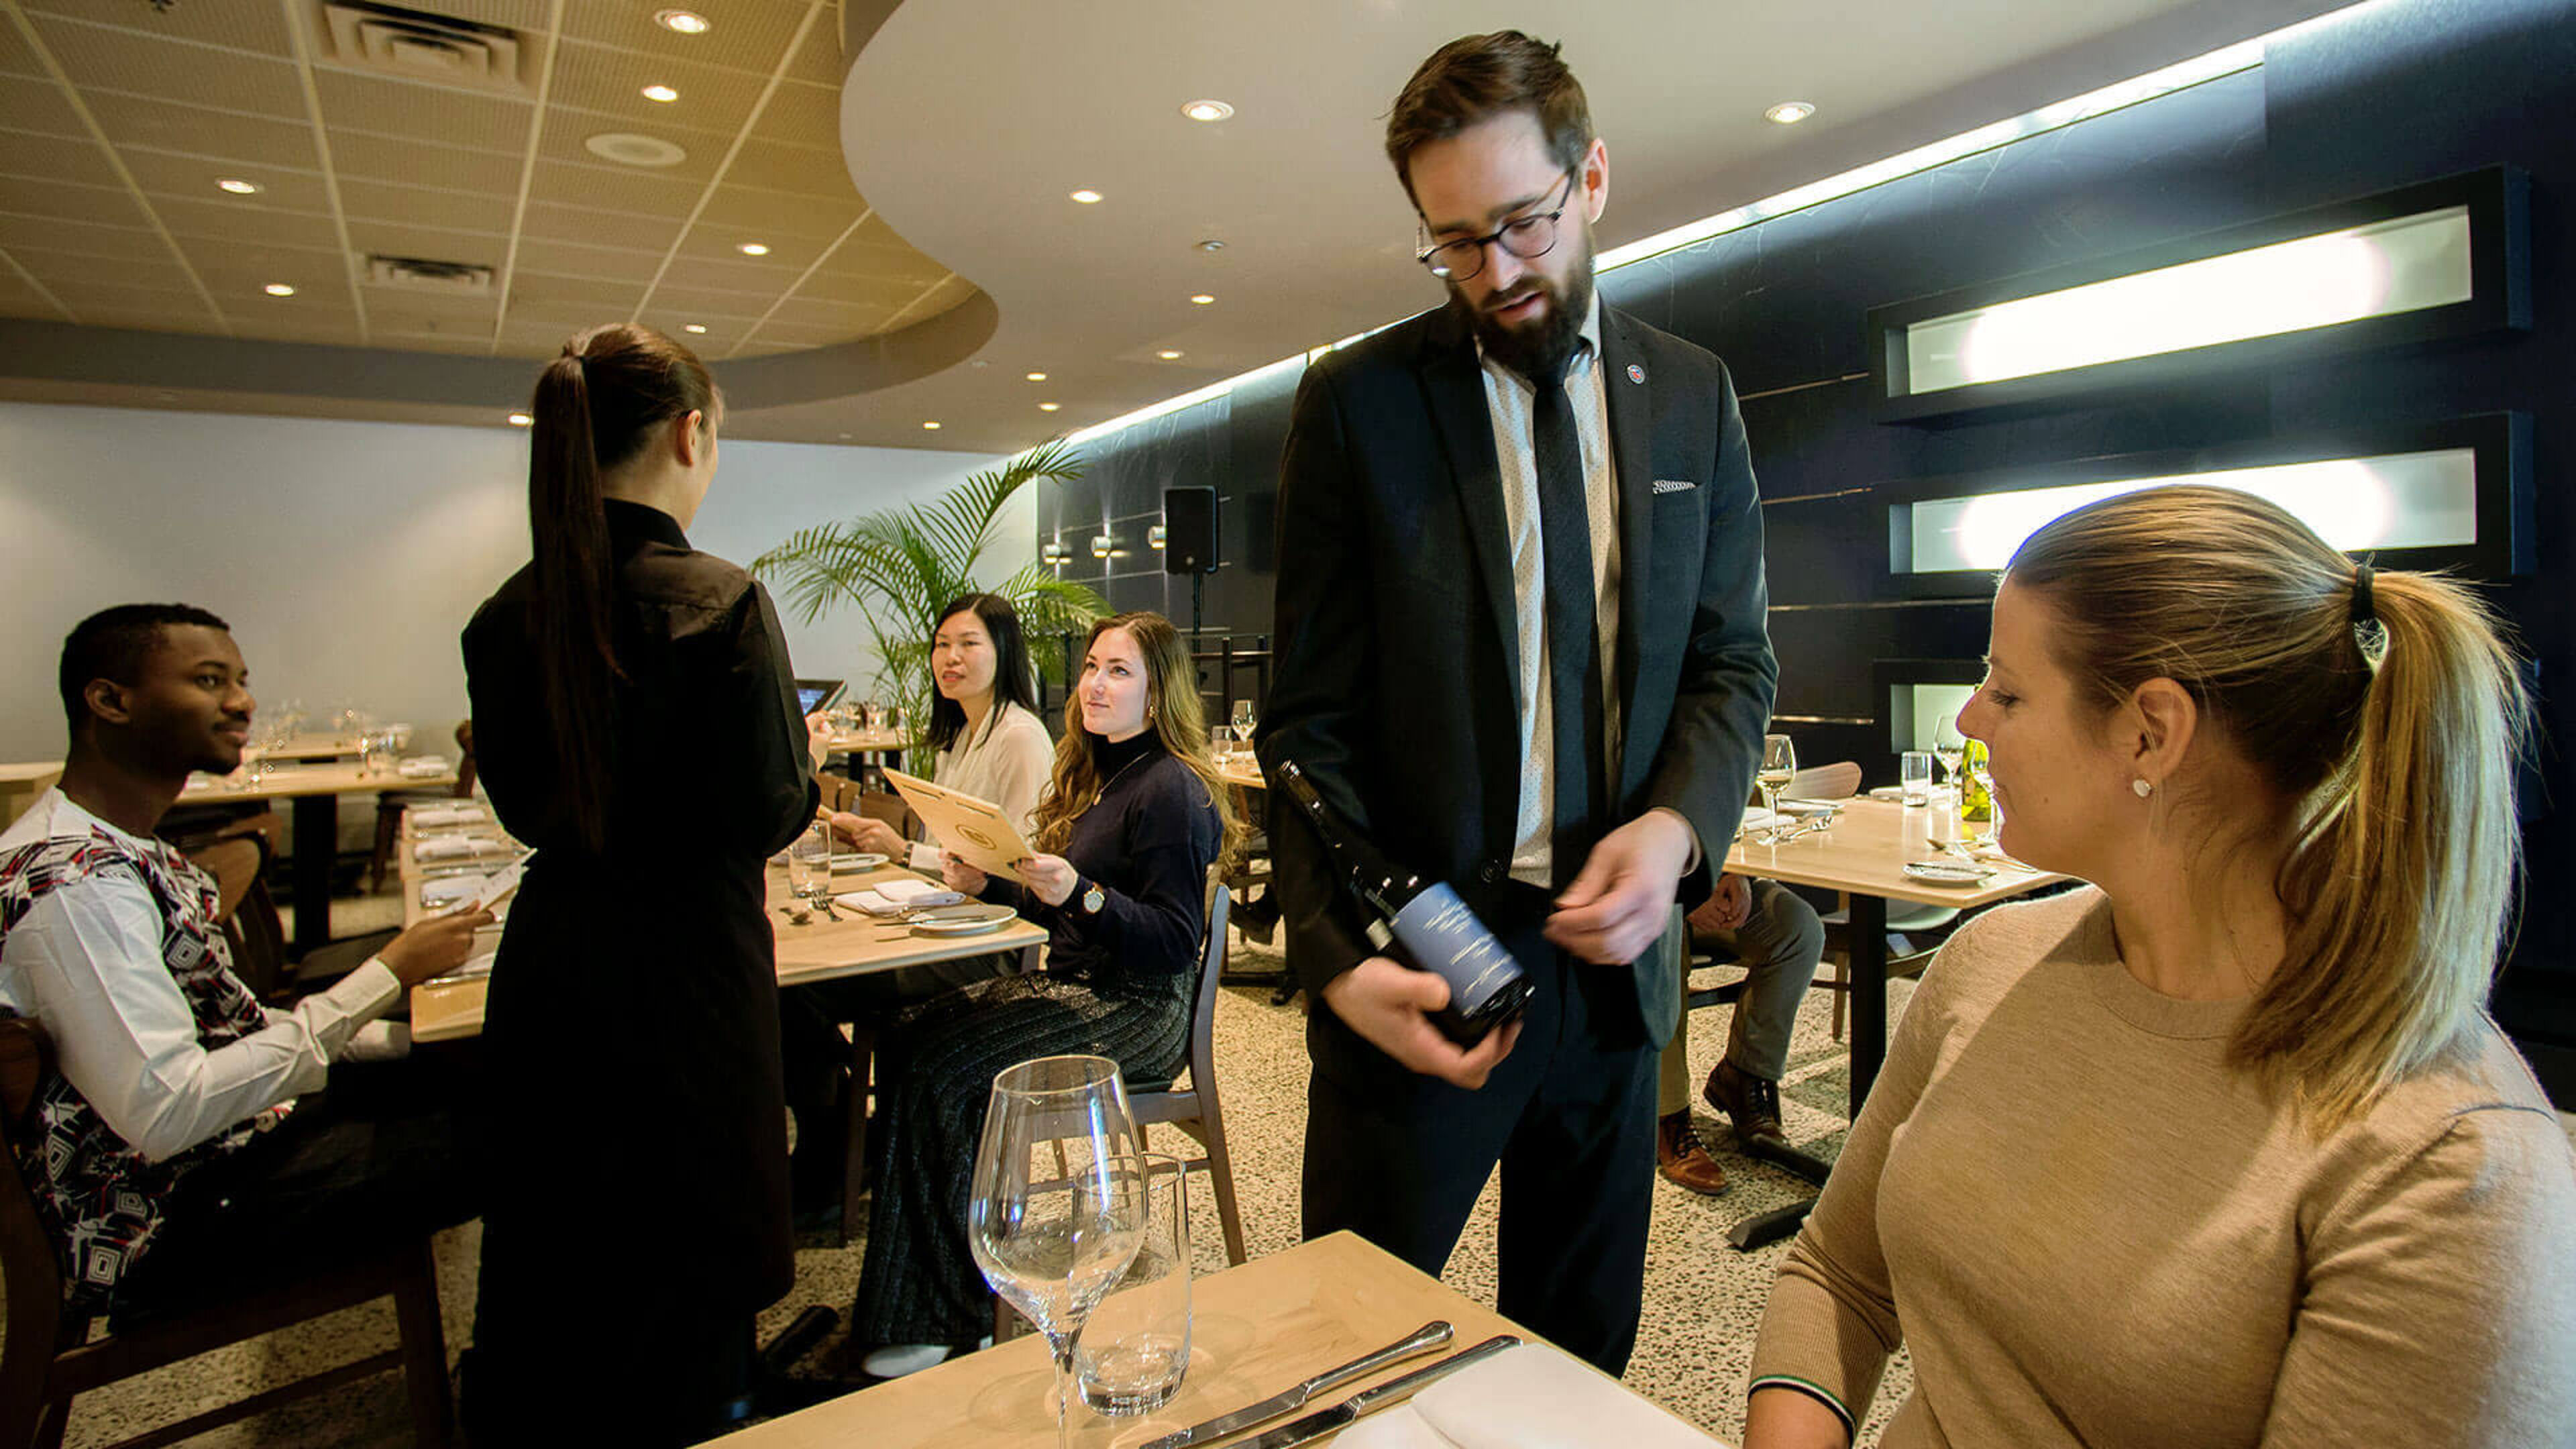 Patrons engage with attentive staff at a refined restaurant, enhancing the dining ambiance.